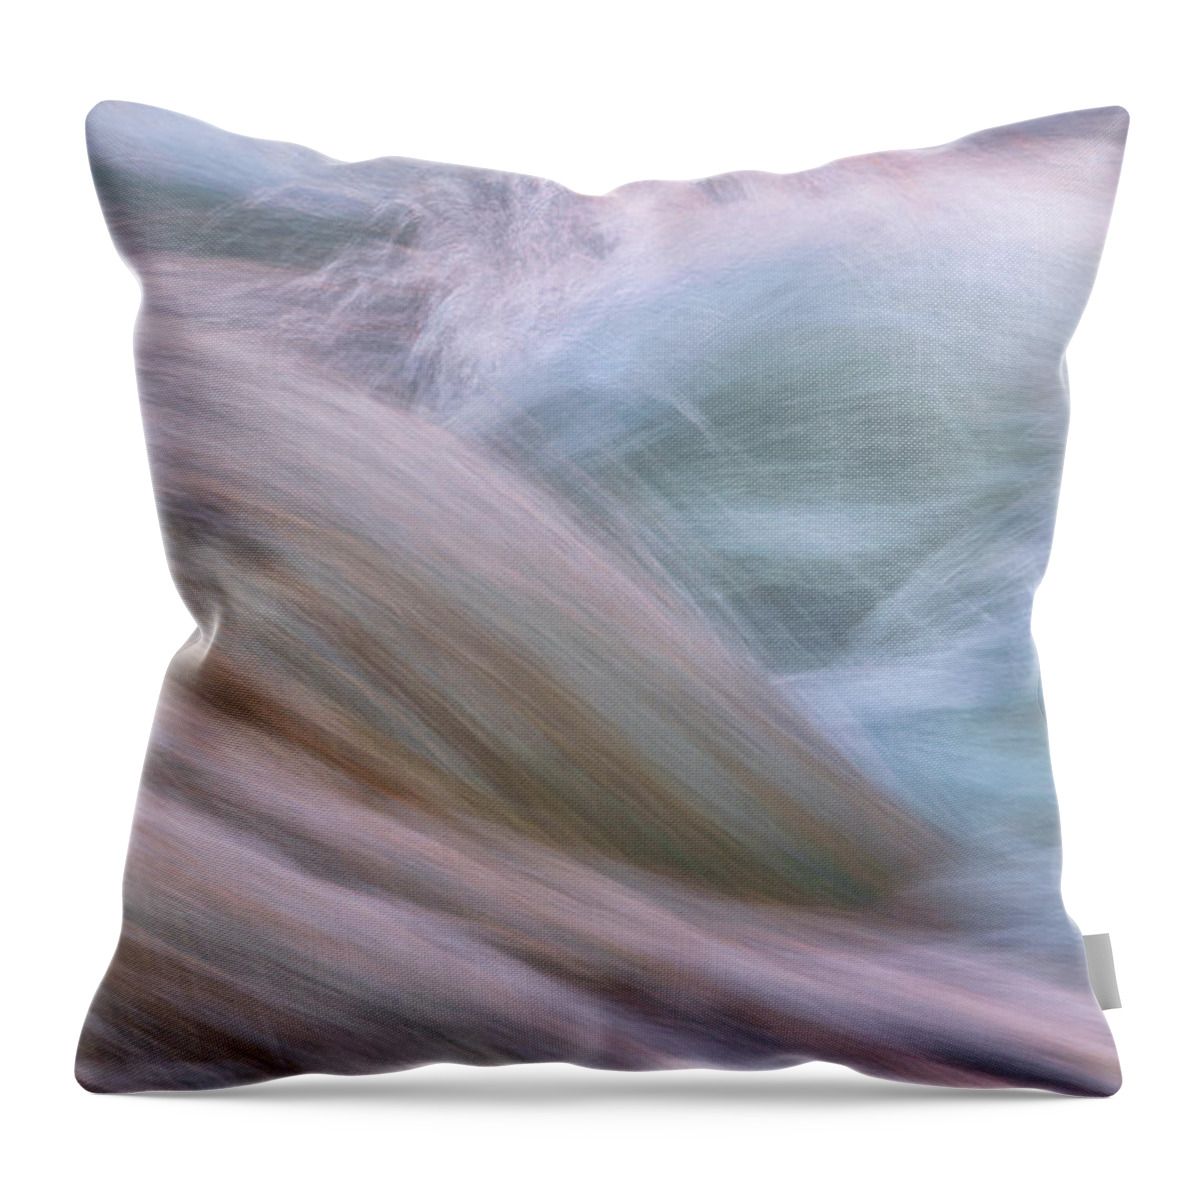 Water Throw Pillow featuring the photograph River Rush by Darren White